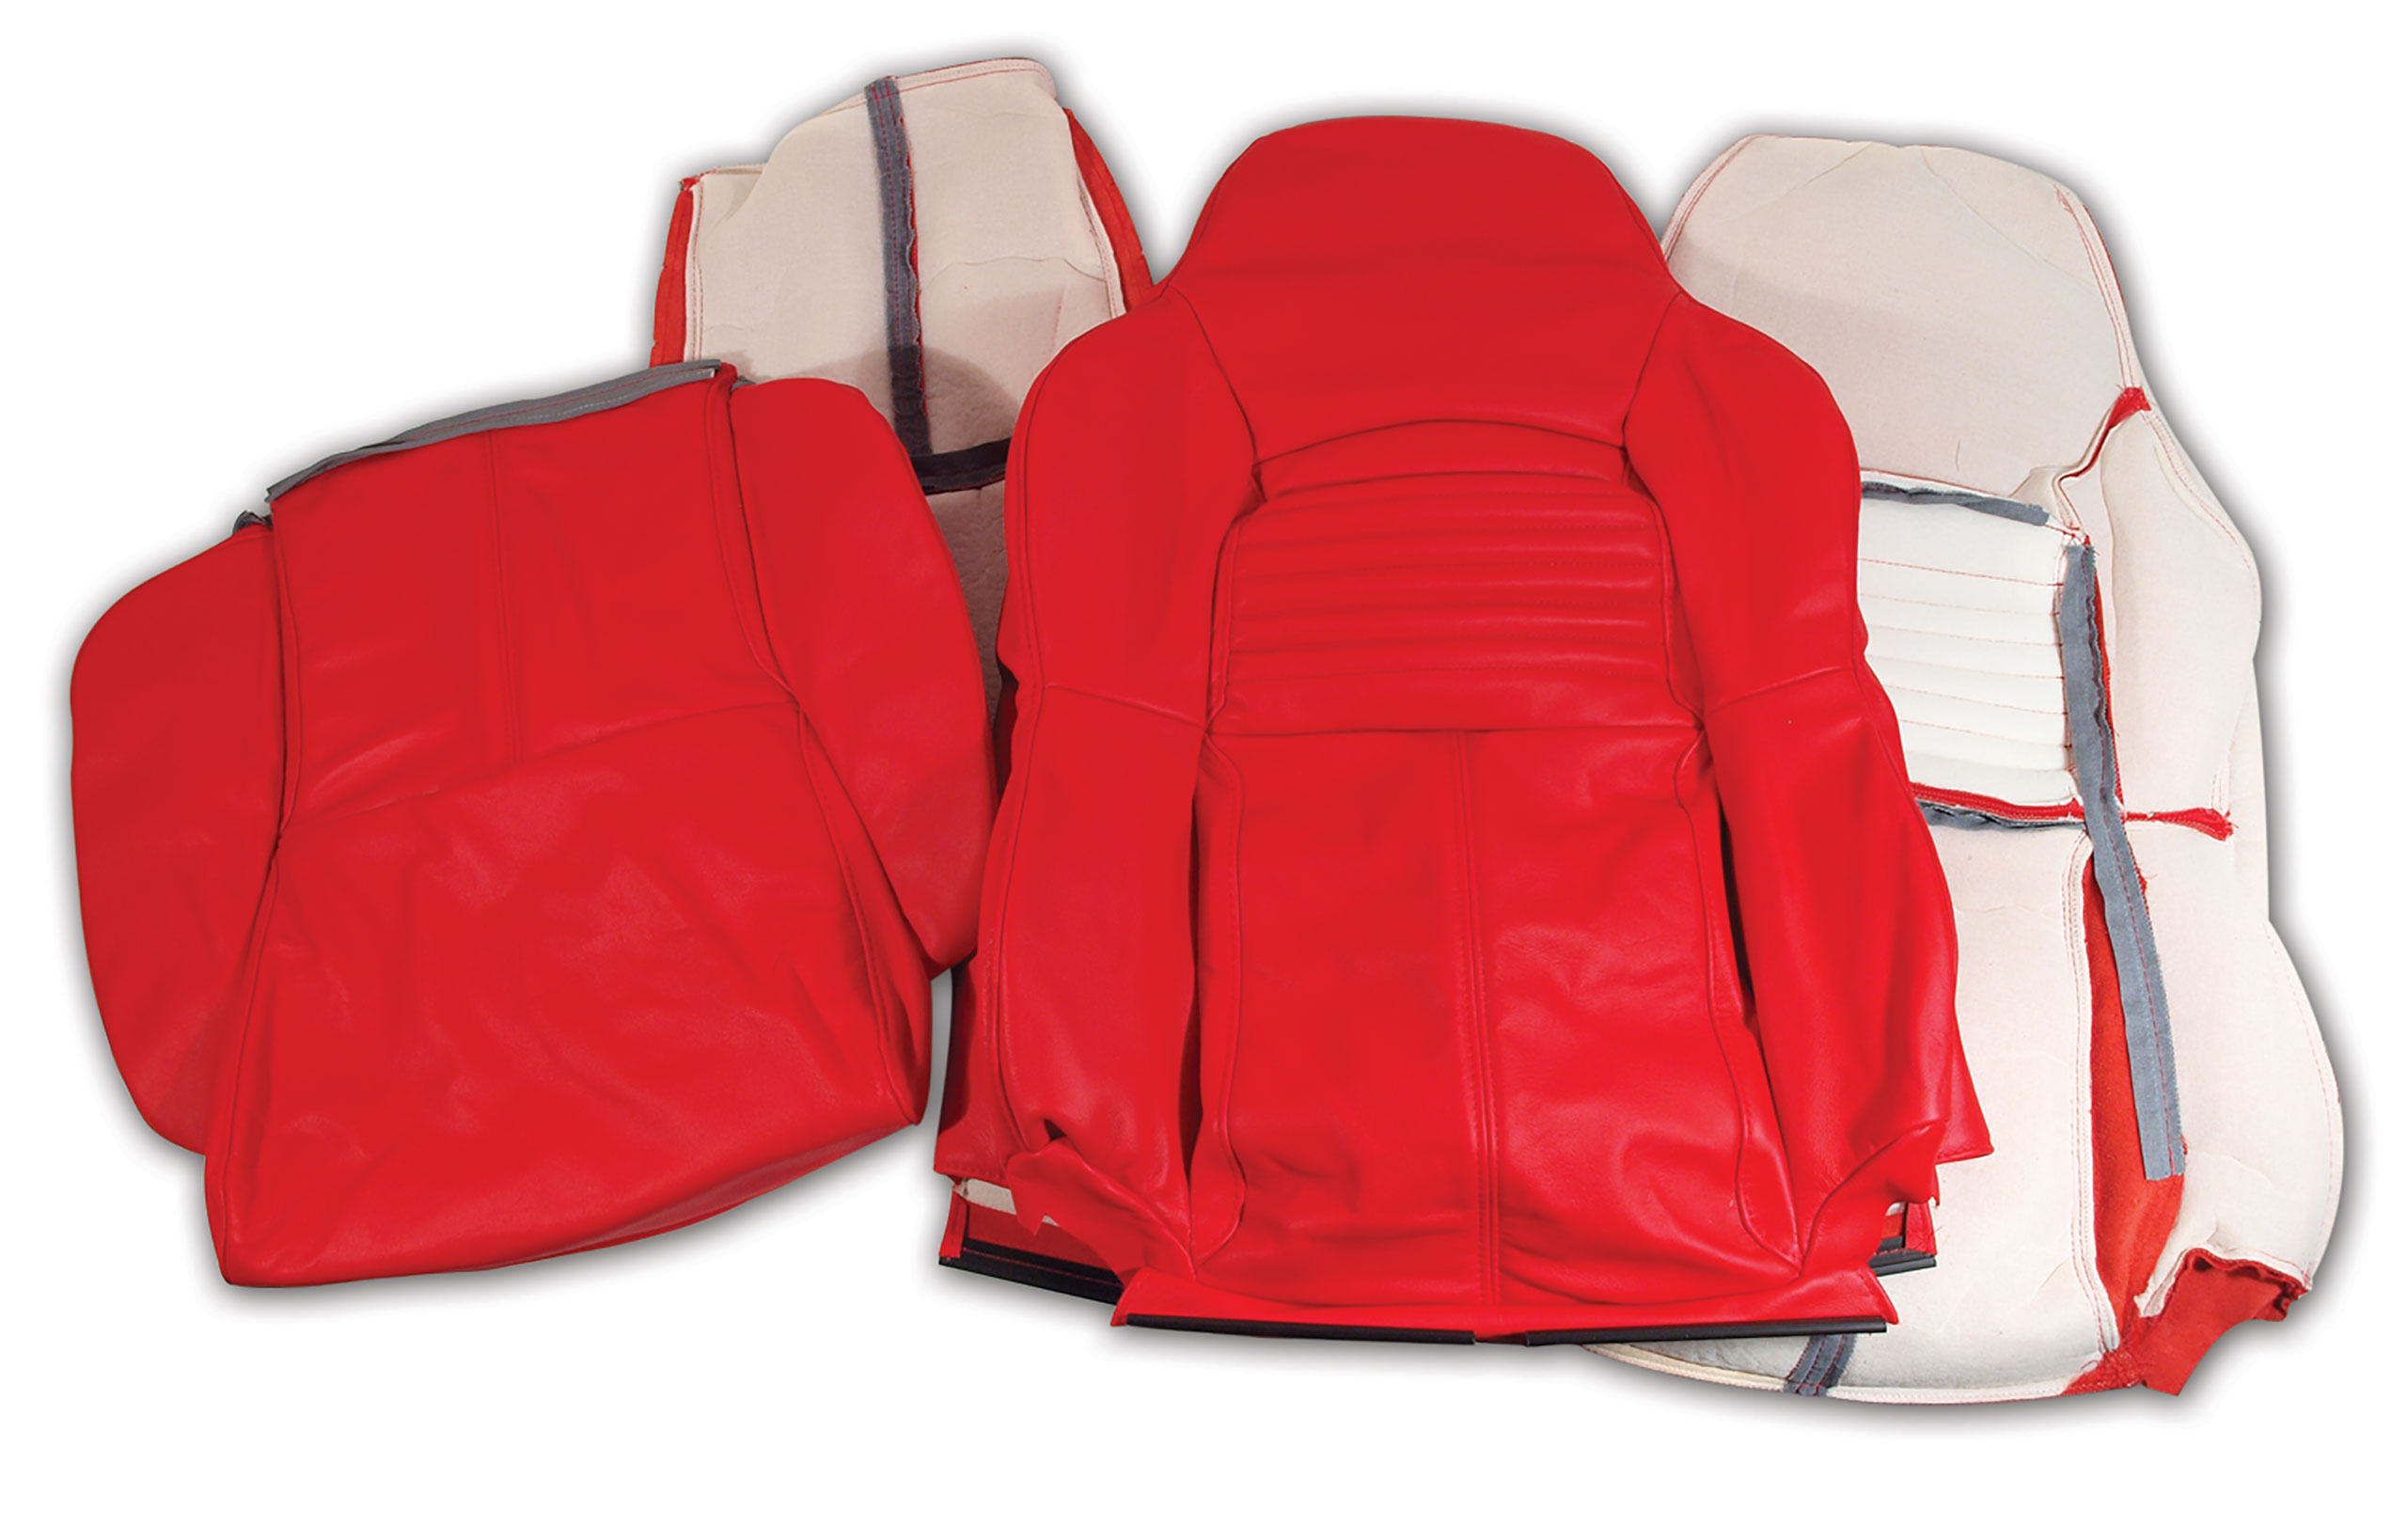 1994-1996 Corvette C4 Leather Seat Covers- Red Standard CA-447285 